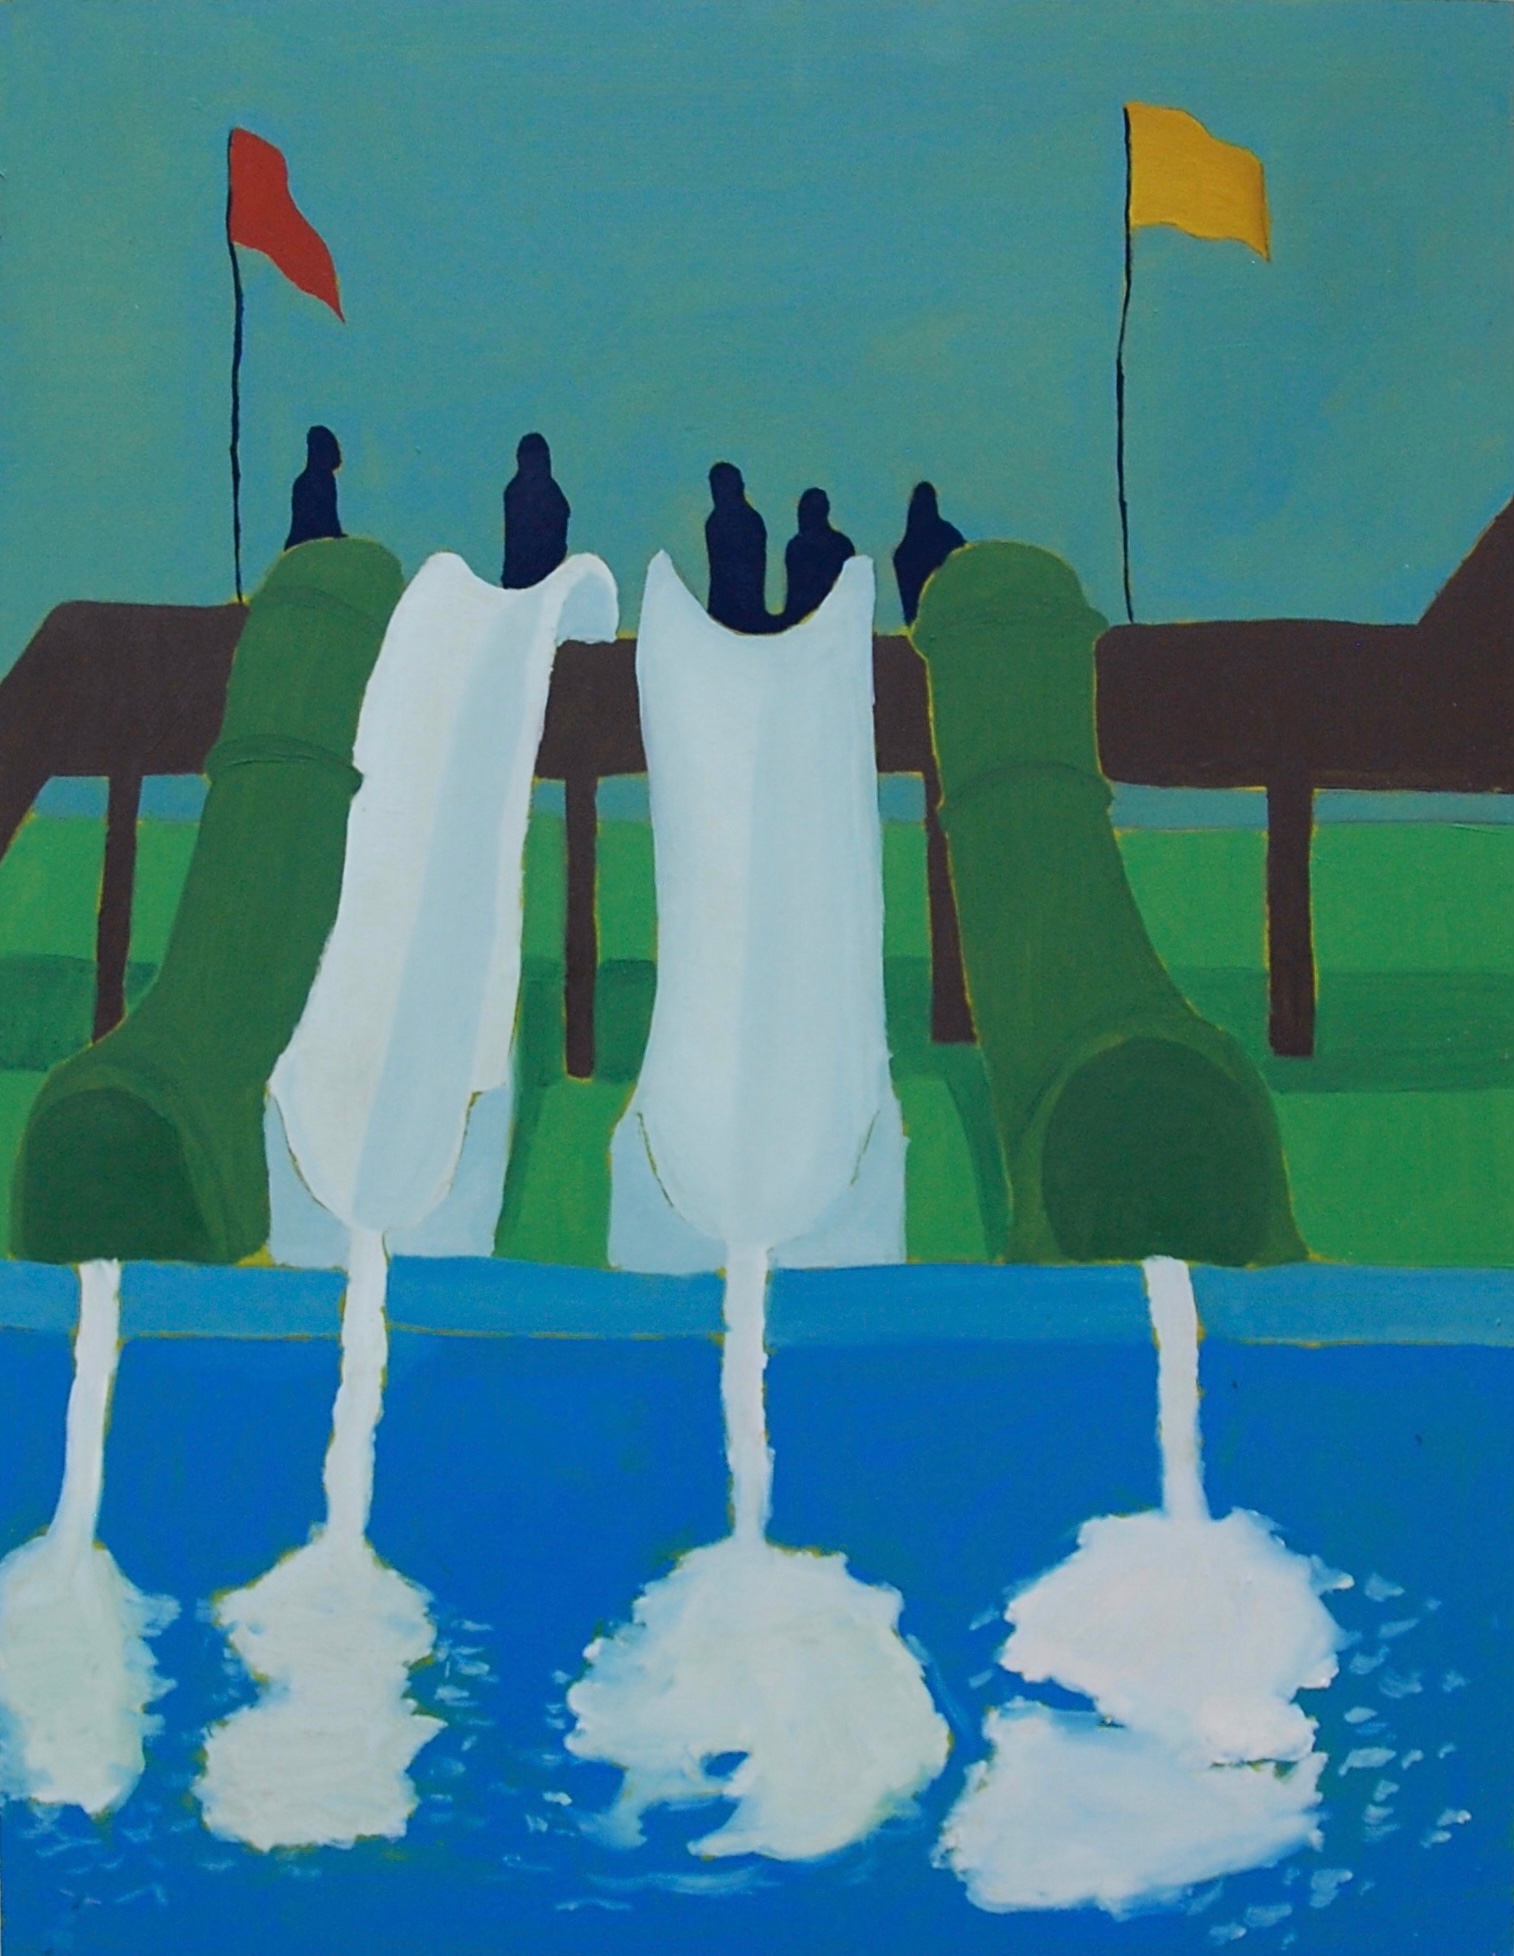 Painting of waterslides and silhouettes waiting to go down them